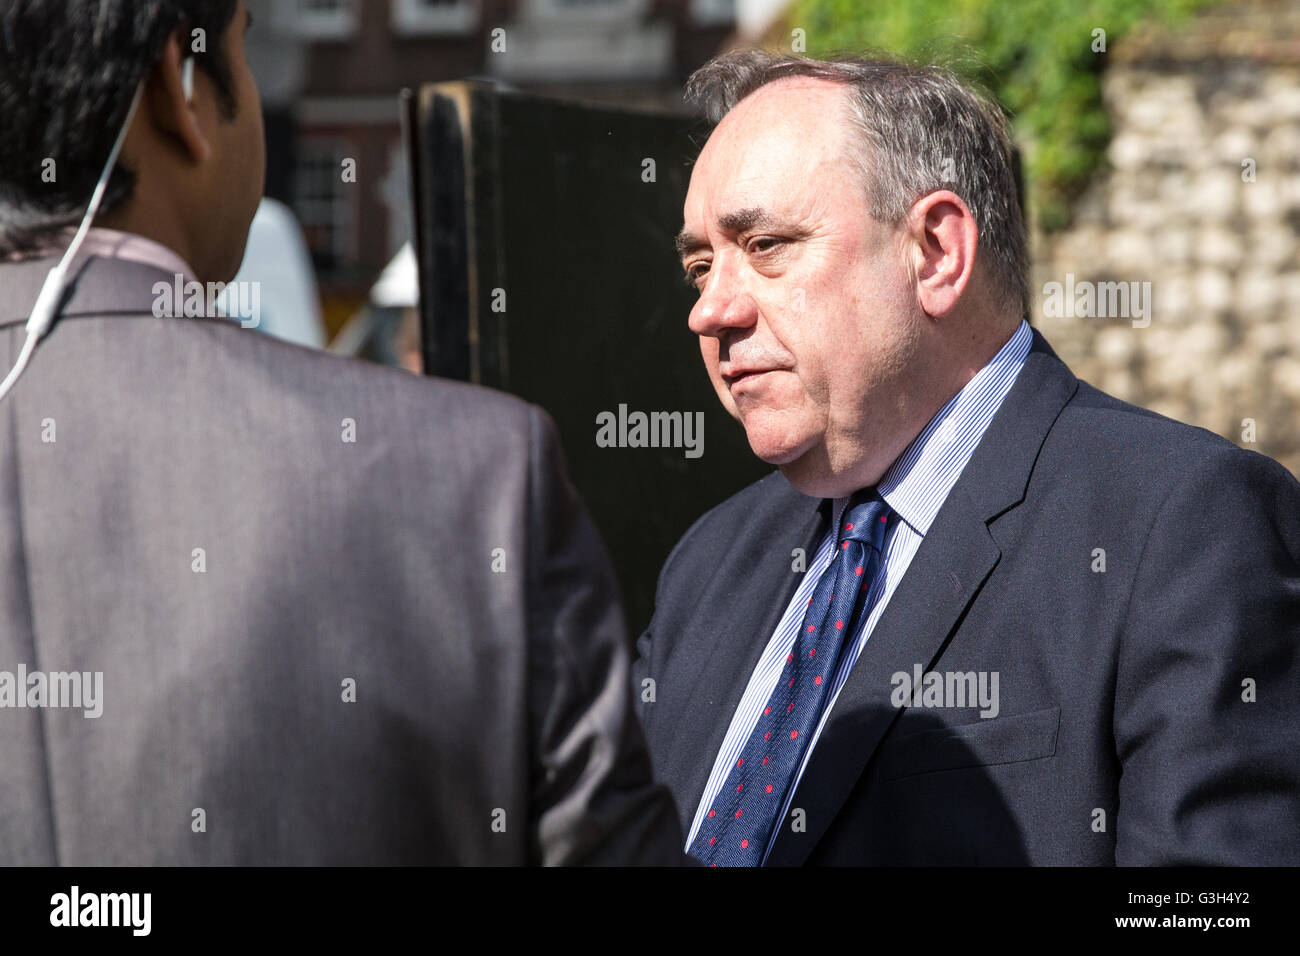 London, UK. 24th June, 2016. Alex Salmond, Scottish National Party MP for Gordon, speaks to the media about the UK's referendum vote to leave the European Union. Credit:  Mark Kerrison/Alamy Live News Stock Photo